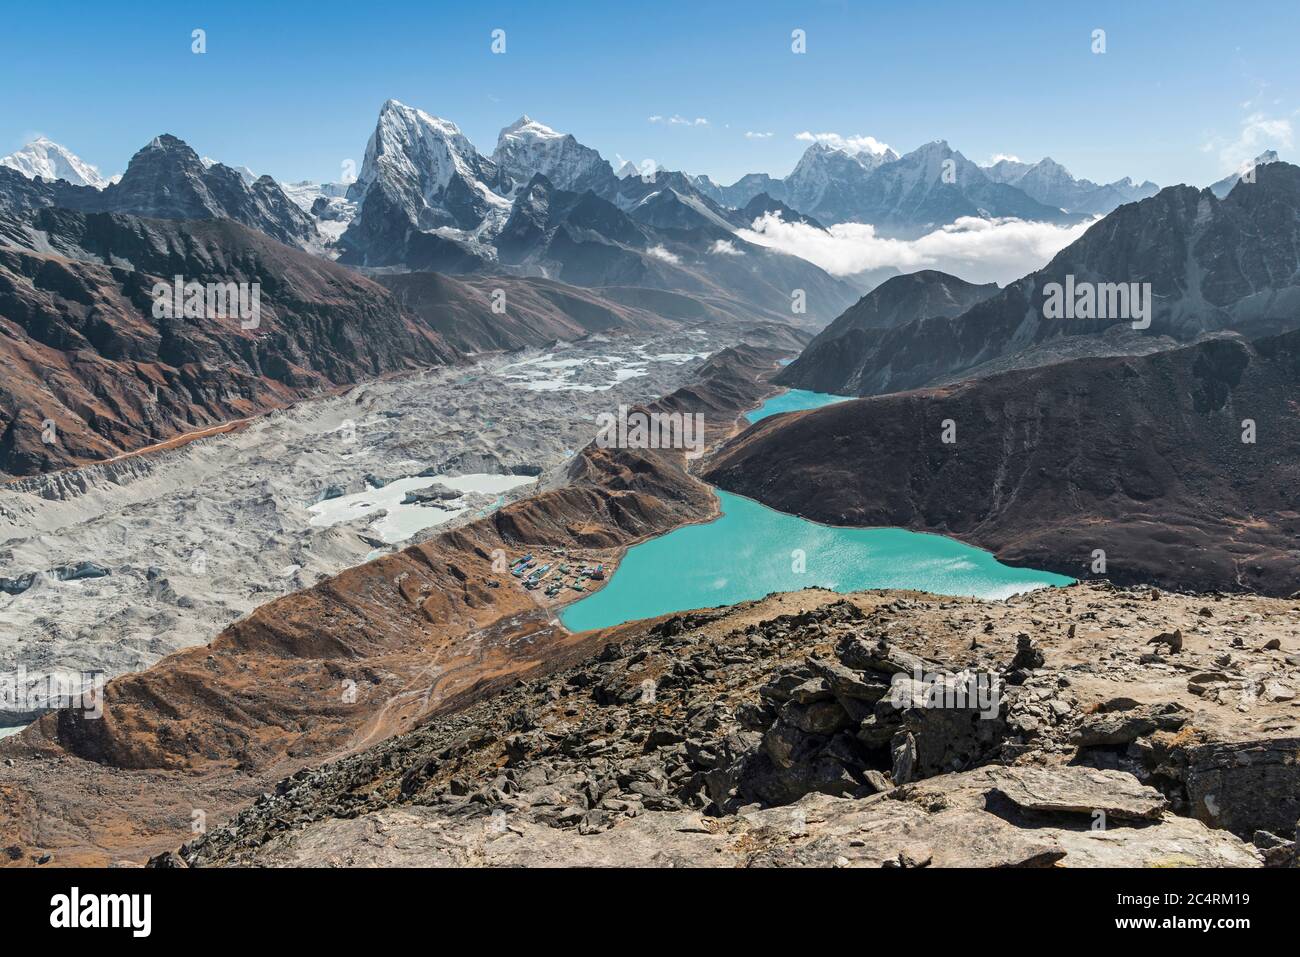 Emerald lakes, snow-capped himalayan peaks and the massive Ngozumpa glacier make the view from Gokyo Ri in Nepal one of the best in the world. Stock Photo